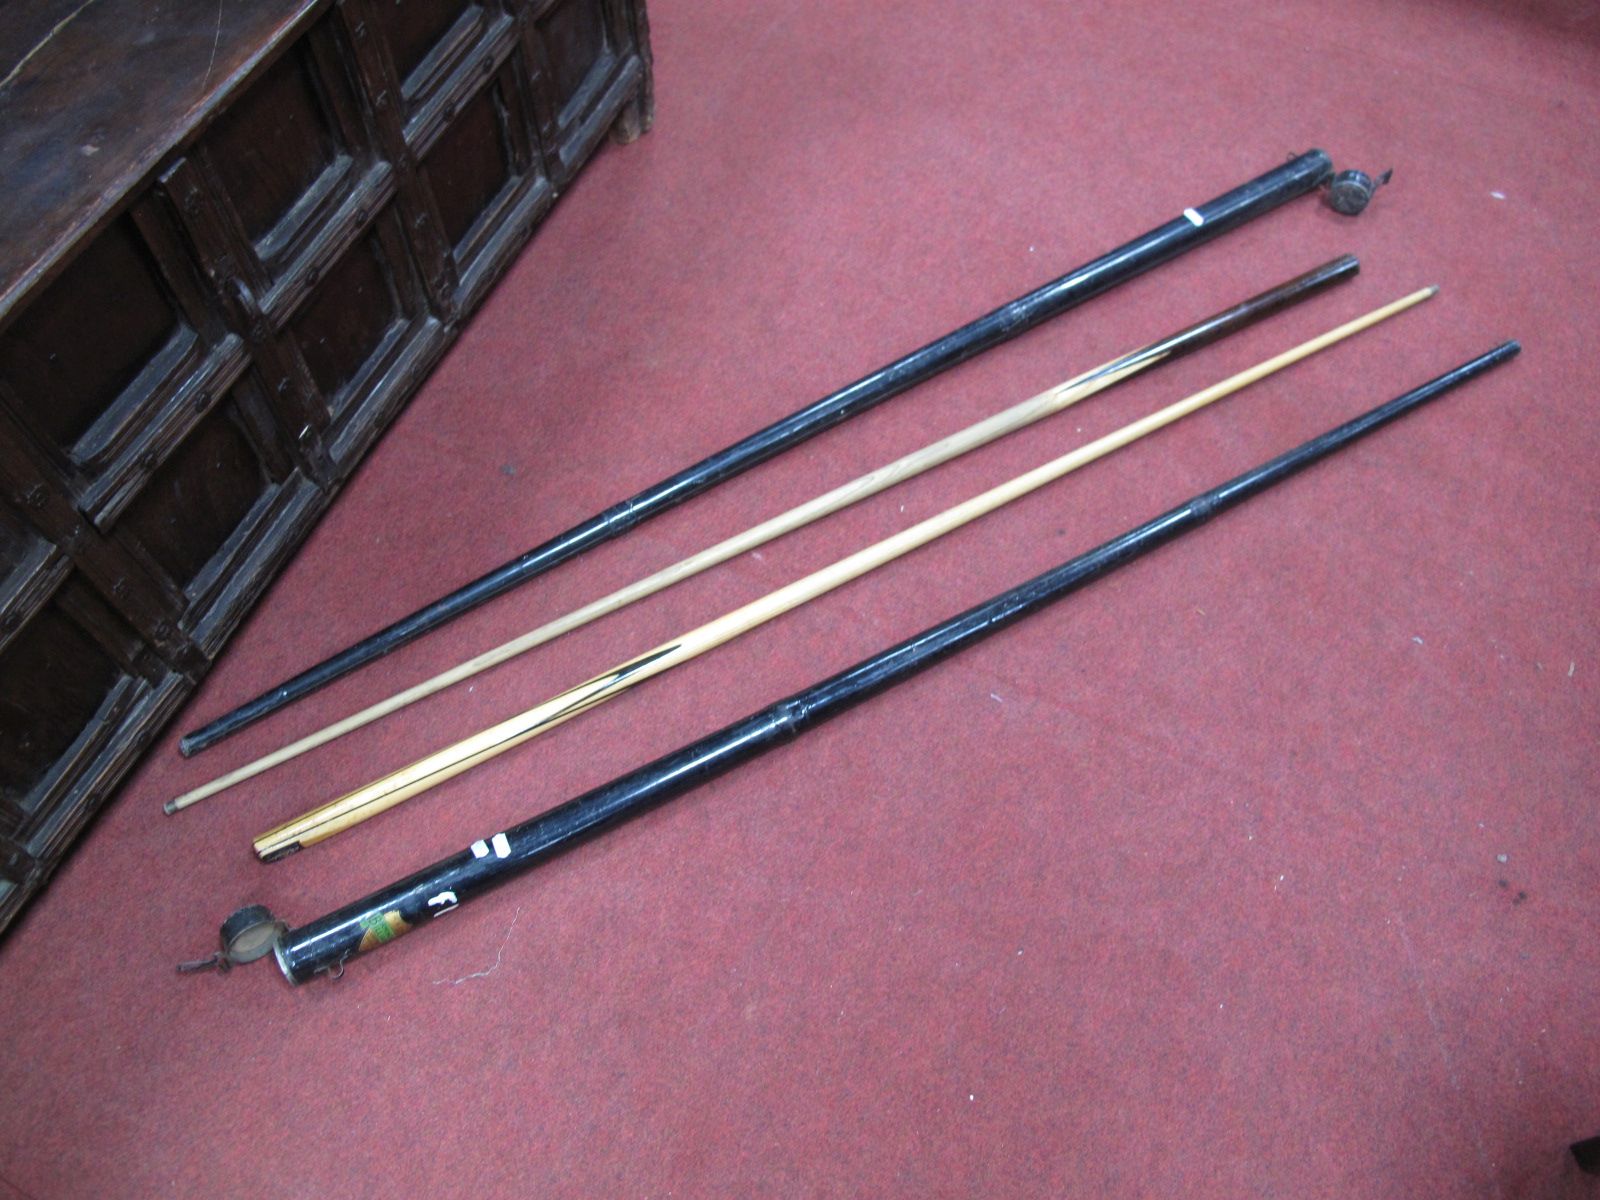 Snooker Cues, E.A. Clare of Liverpool, 18oz, and W.A. Camkin, both with metal cases. (2)